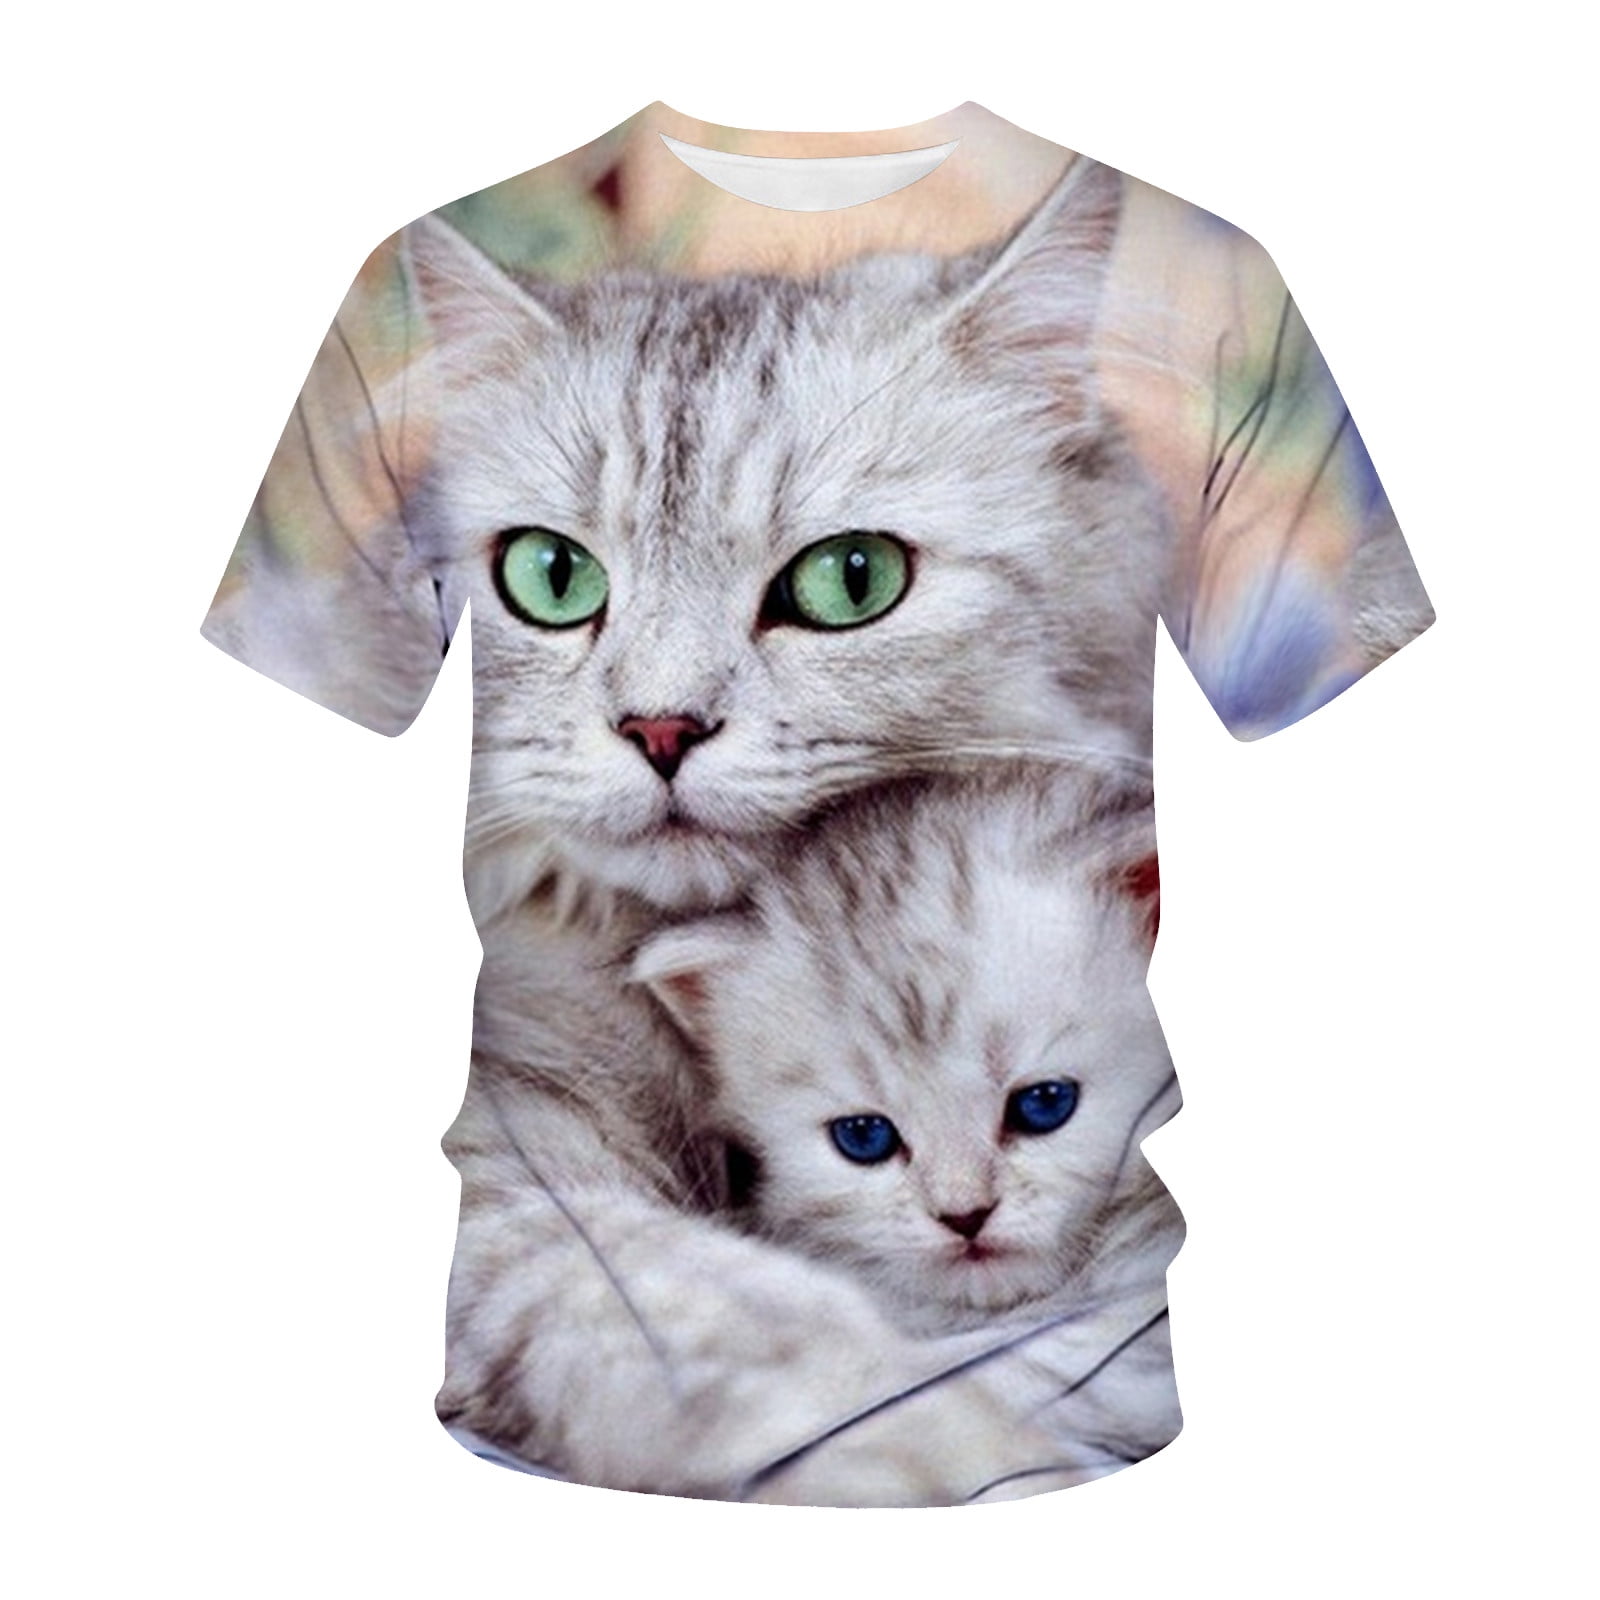 STORTO Mens Cute Cat Pattern 3D Printed Tee Shirts Crew Neck Short Sleeve Fashion Casual Tops